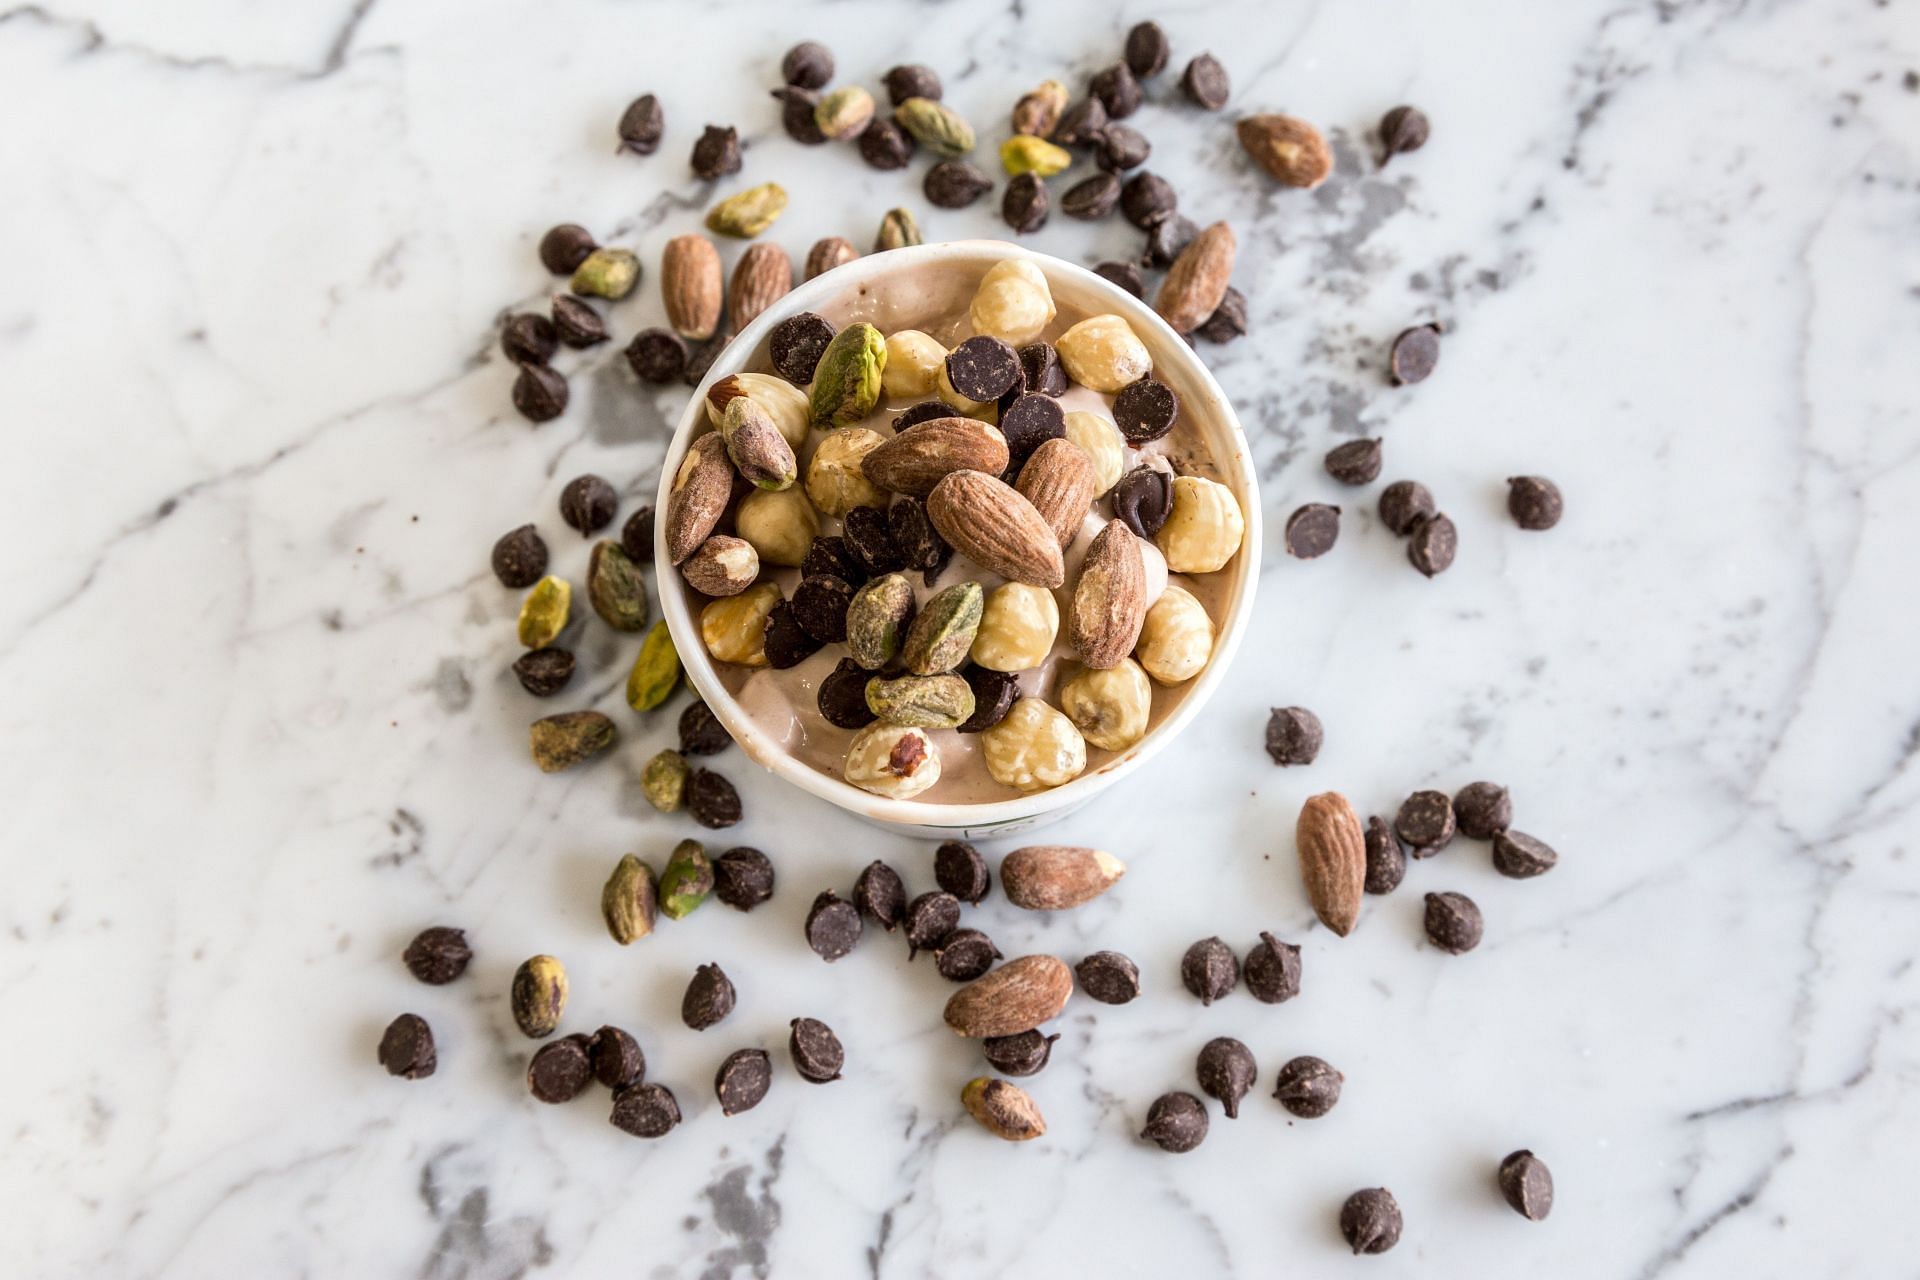 include more of walnuts and brazil nuts. (Image via Pexels / David disponett)